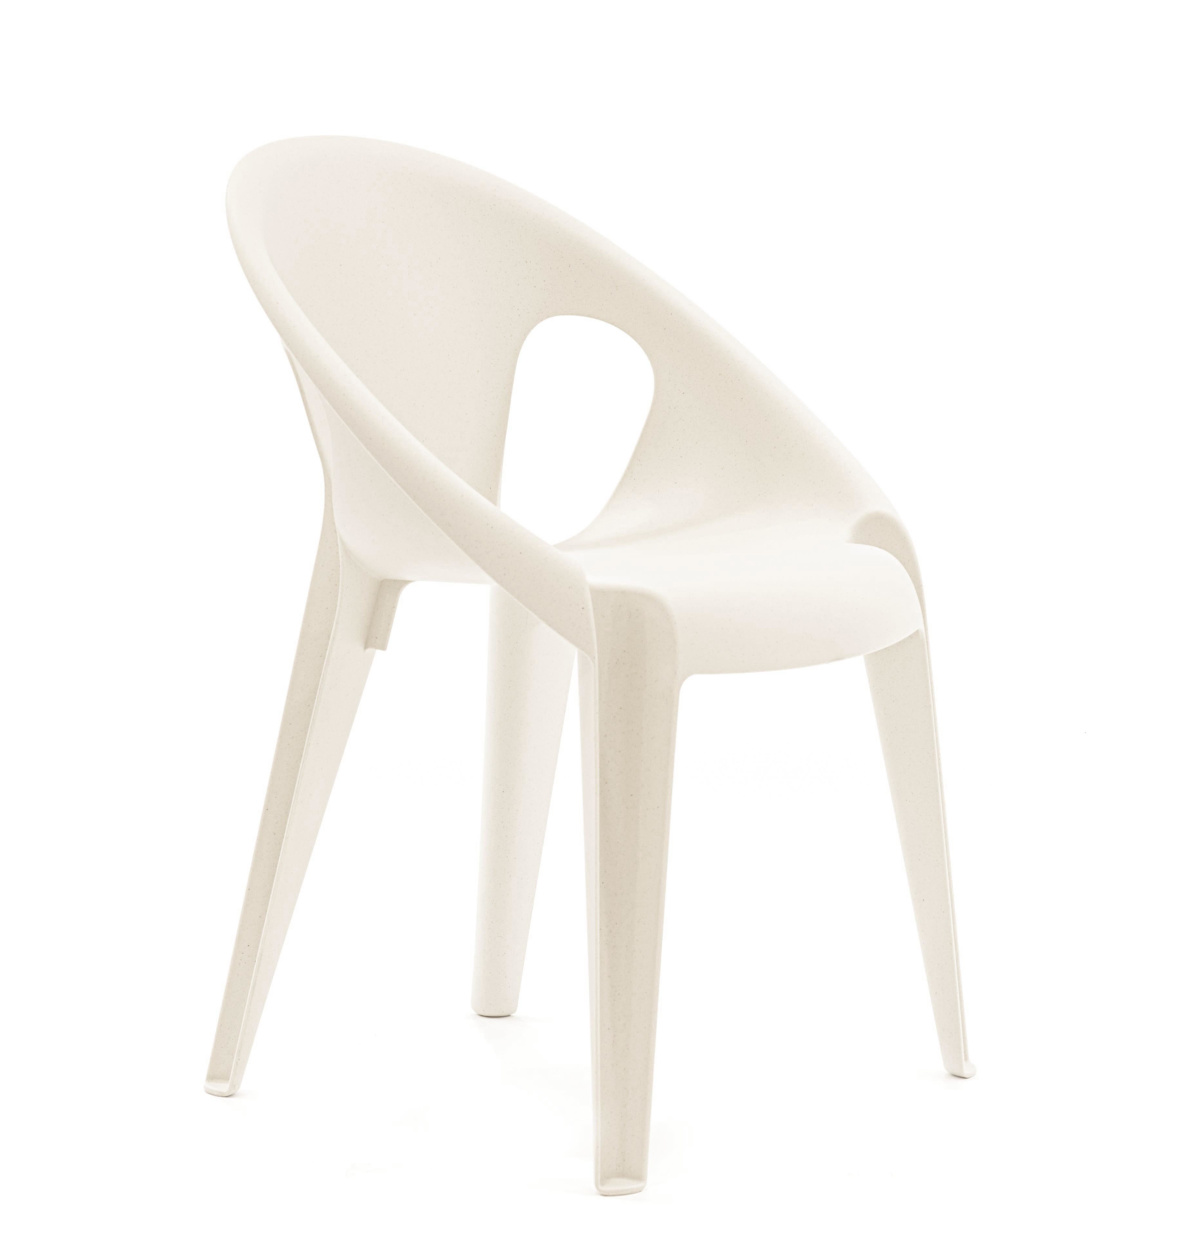 Bell Chair, highnoon white